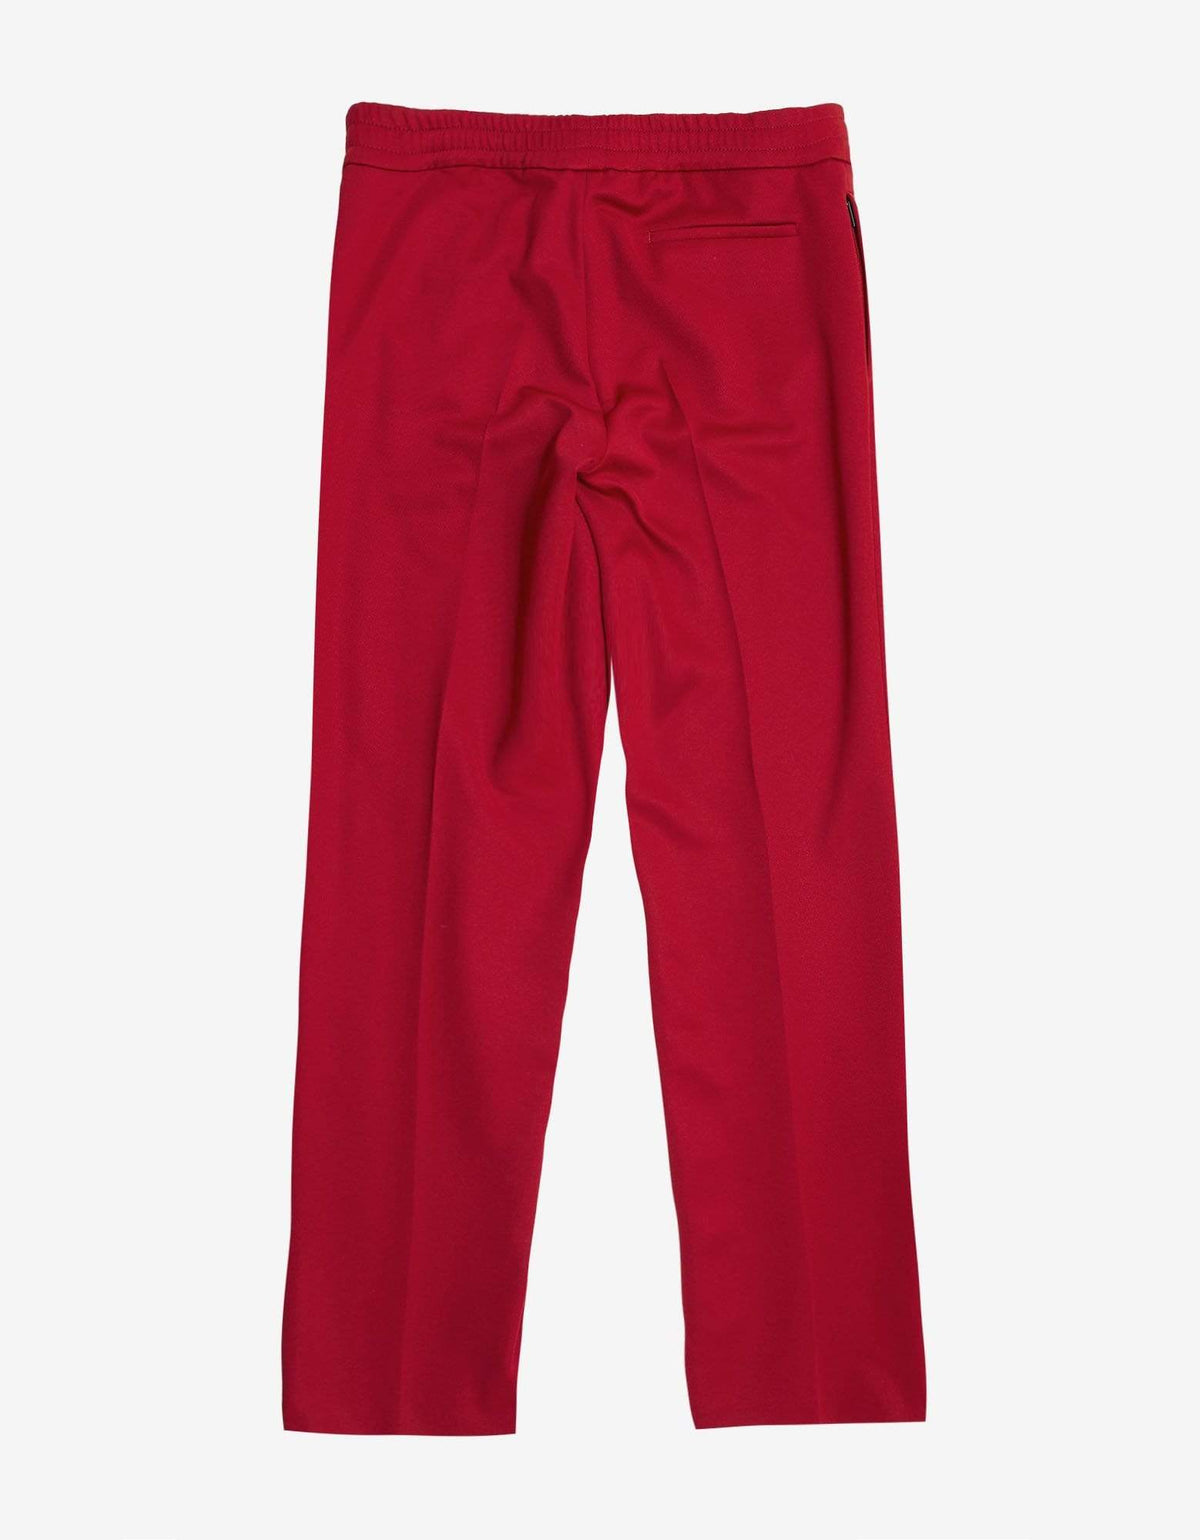 Valentino Red Trousers with White Stripes